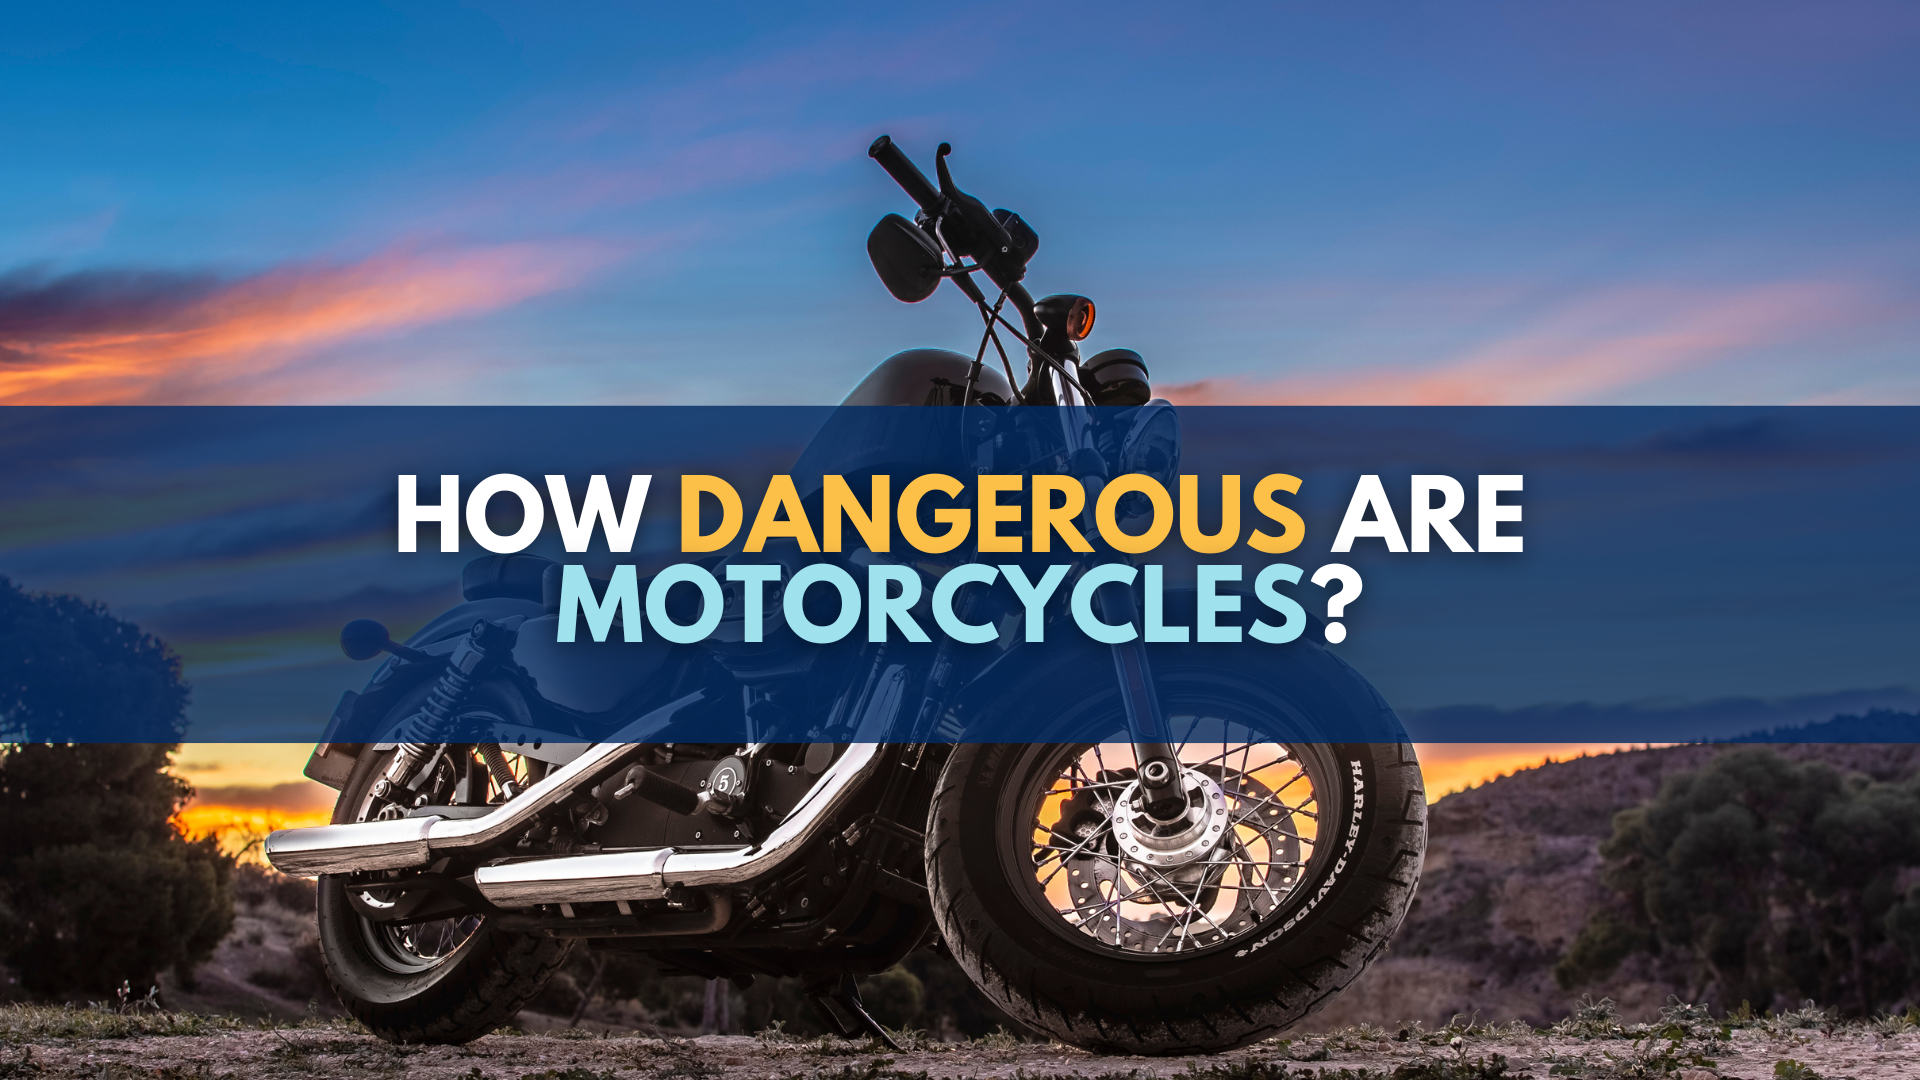 How Dangerous are Motorcycles?